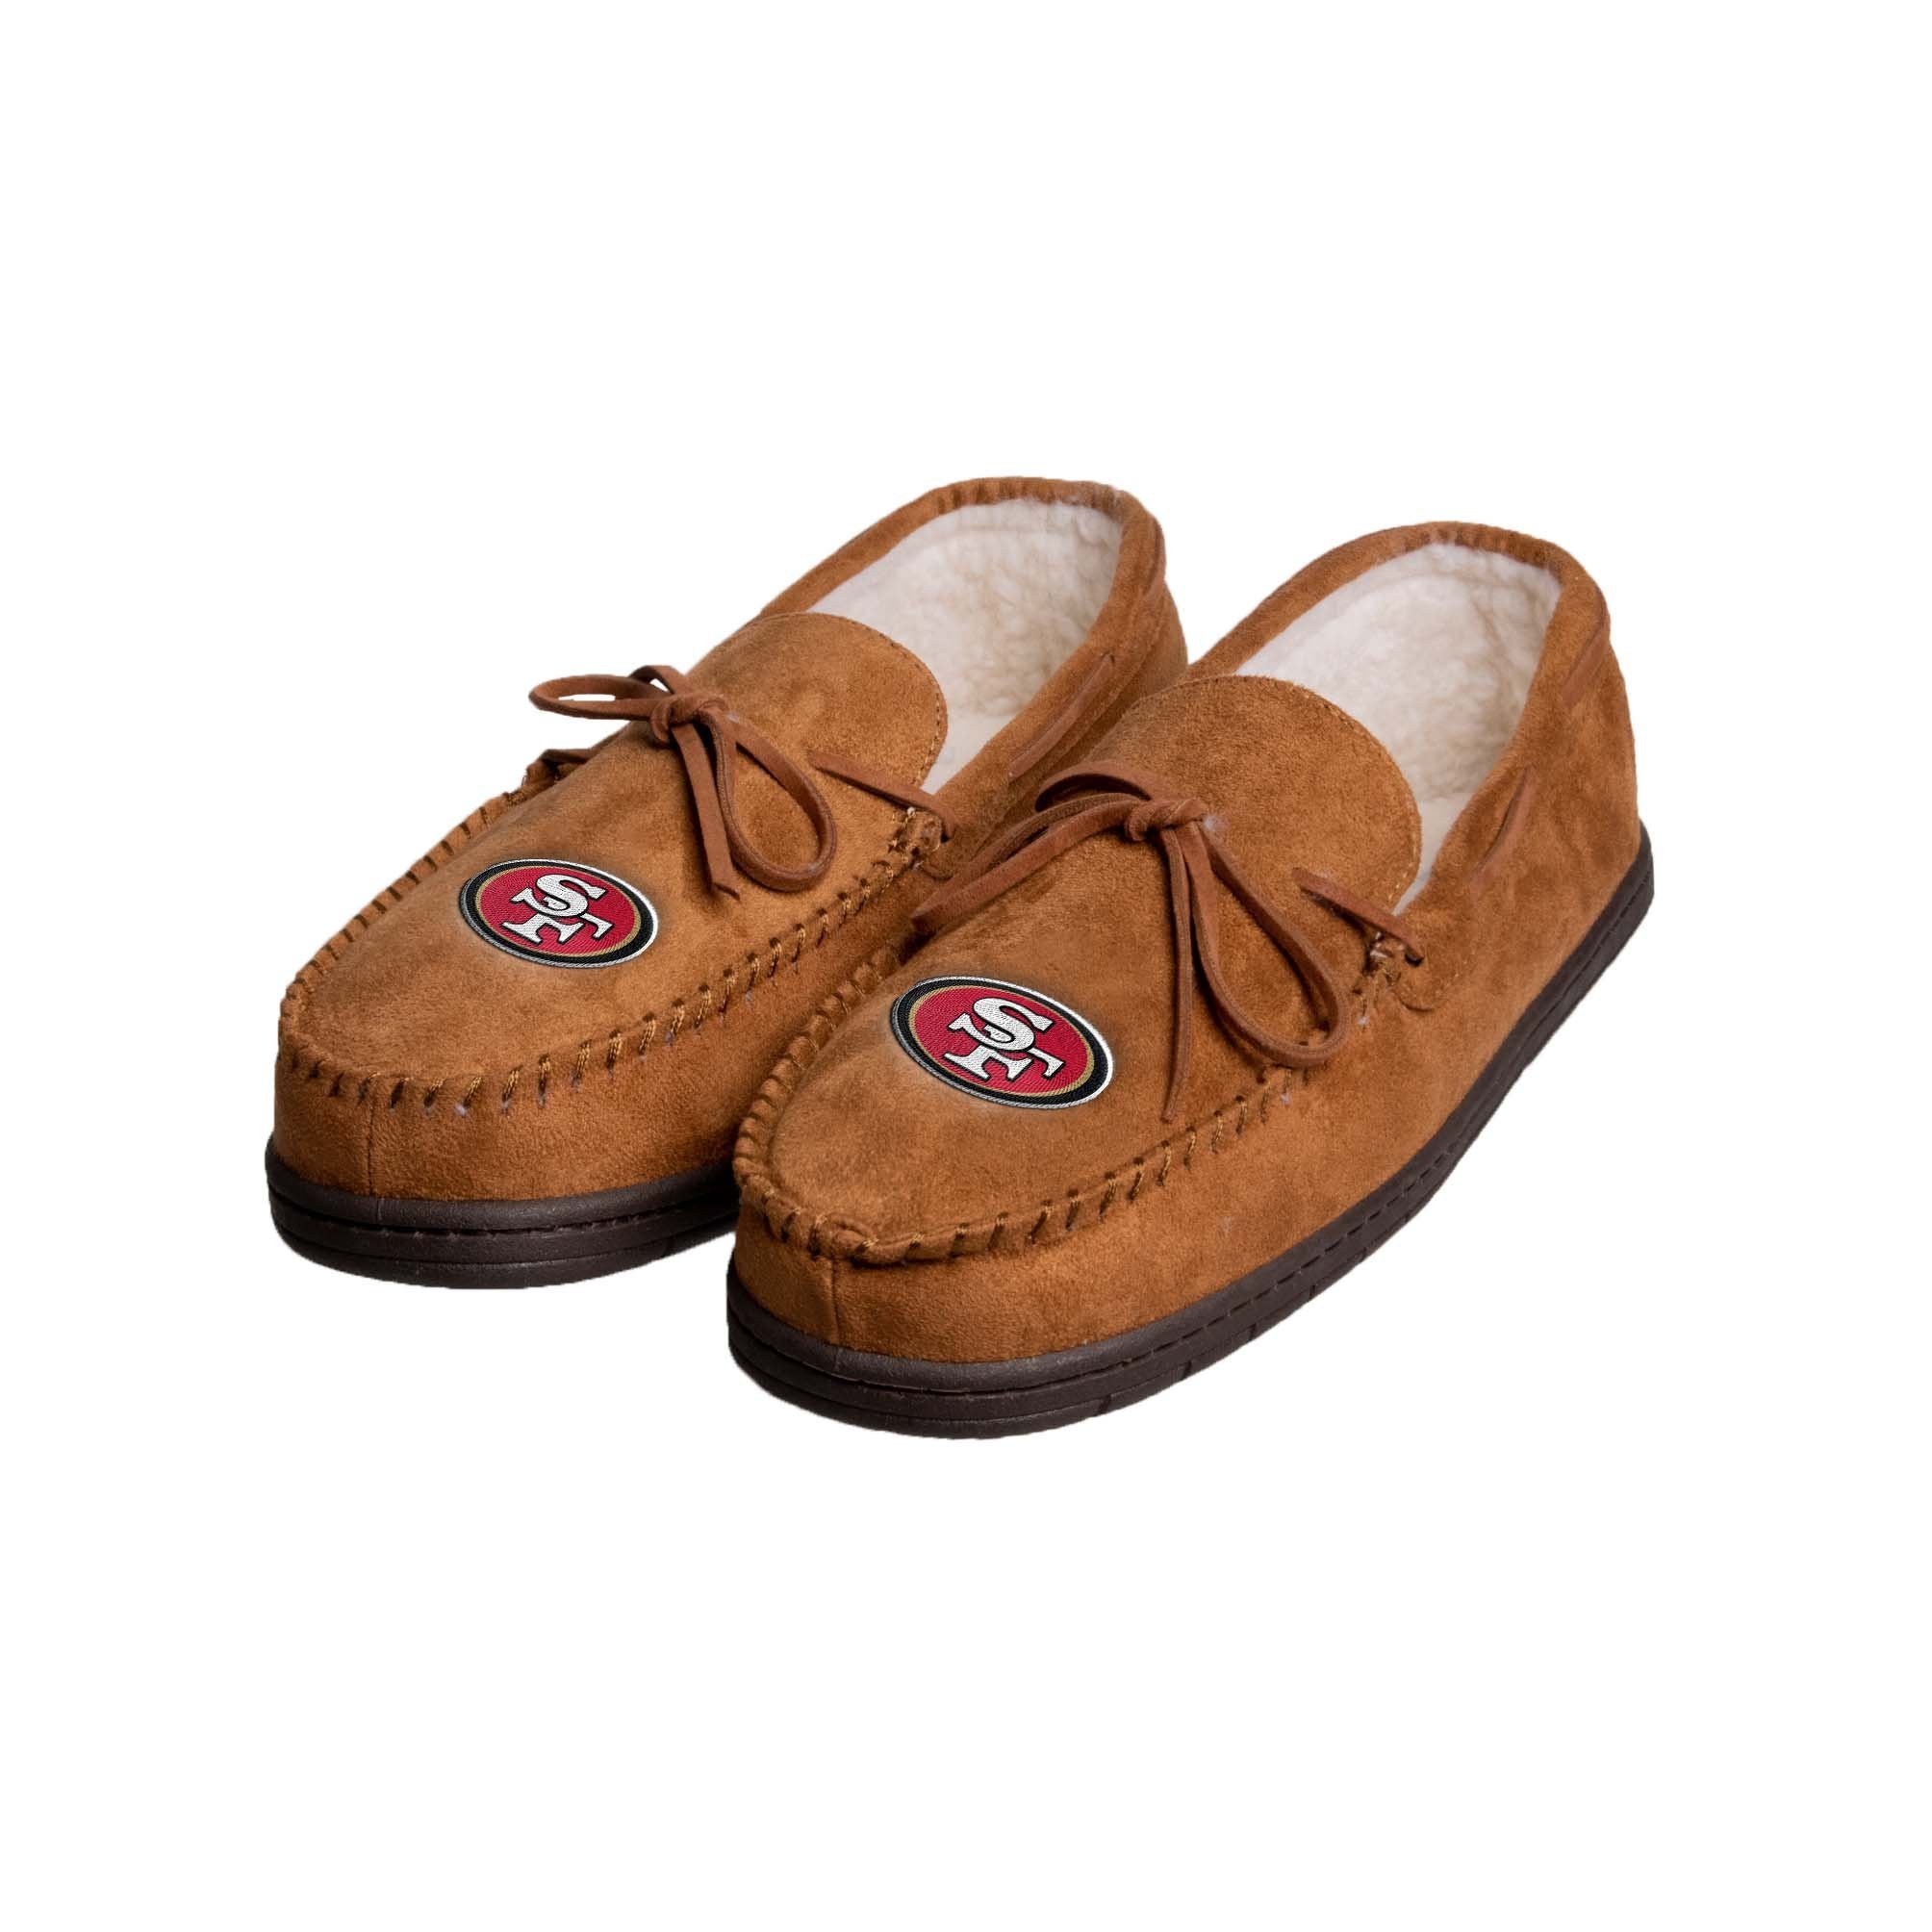 San Francisco 49ers Men's Moccasin Slippers 21 / S